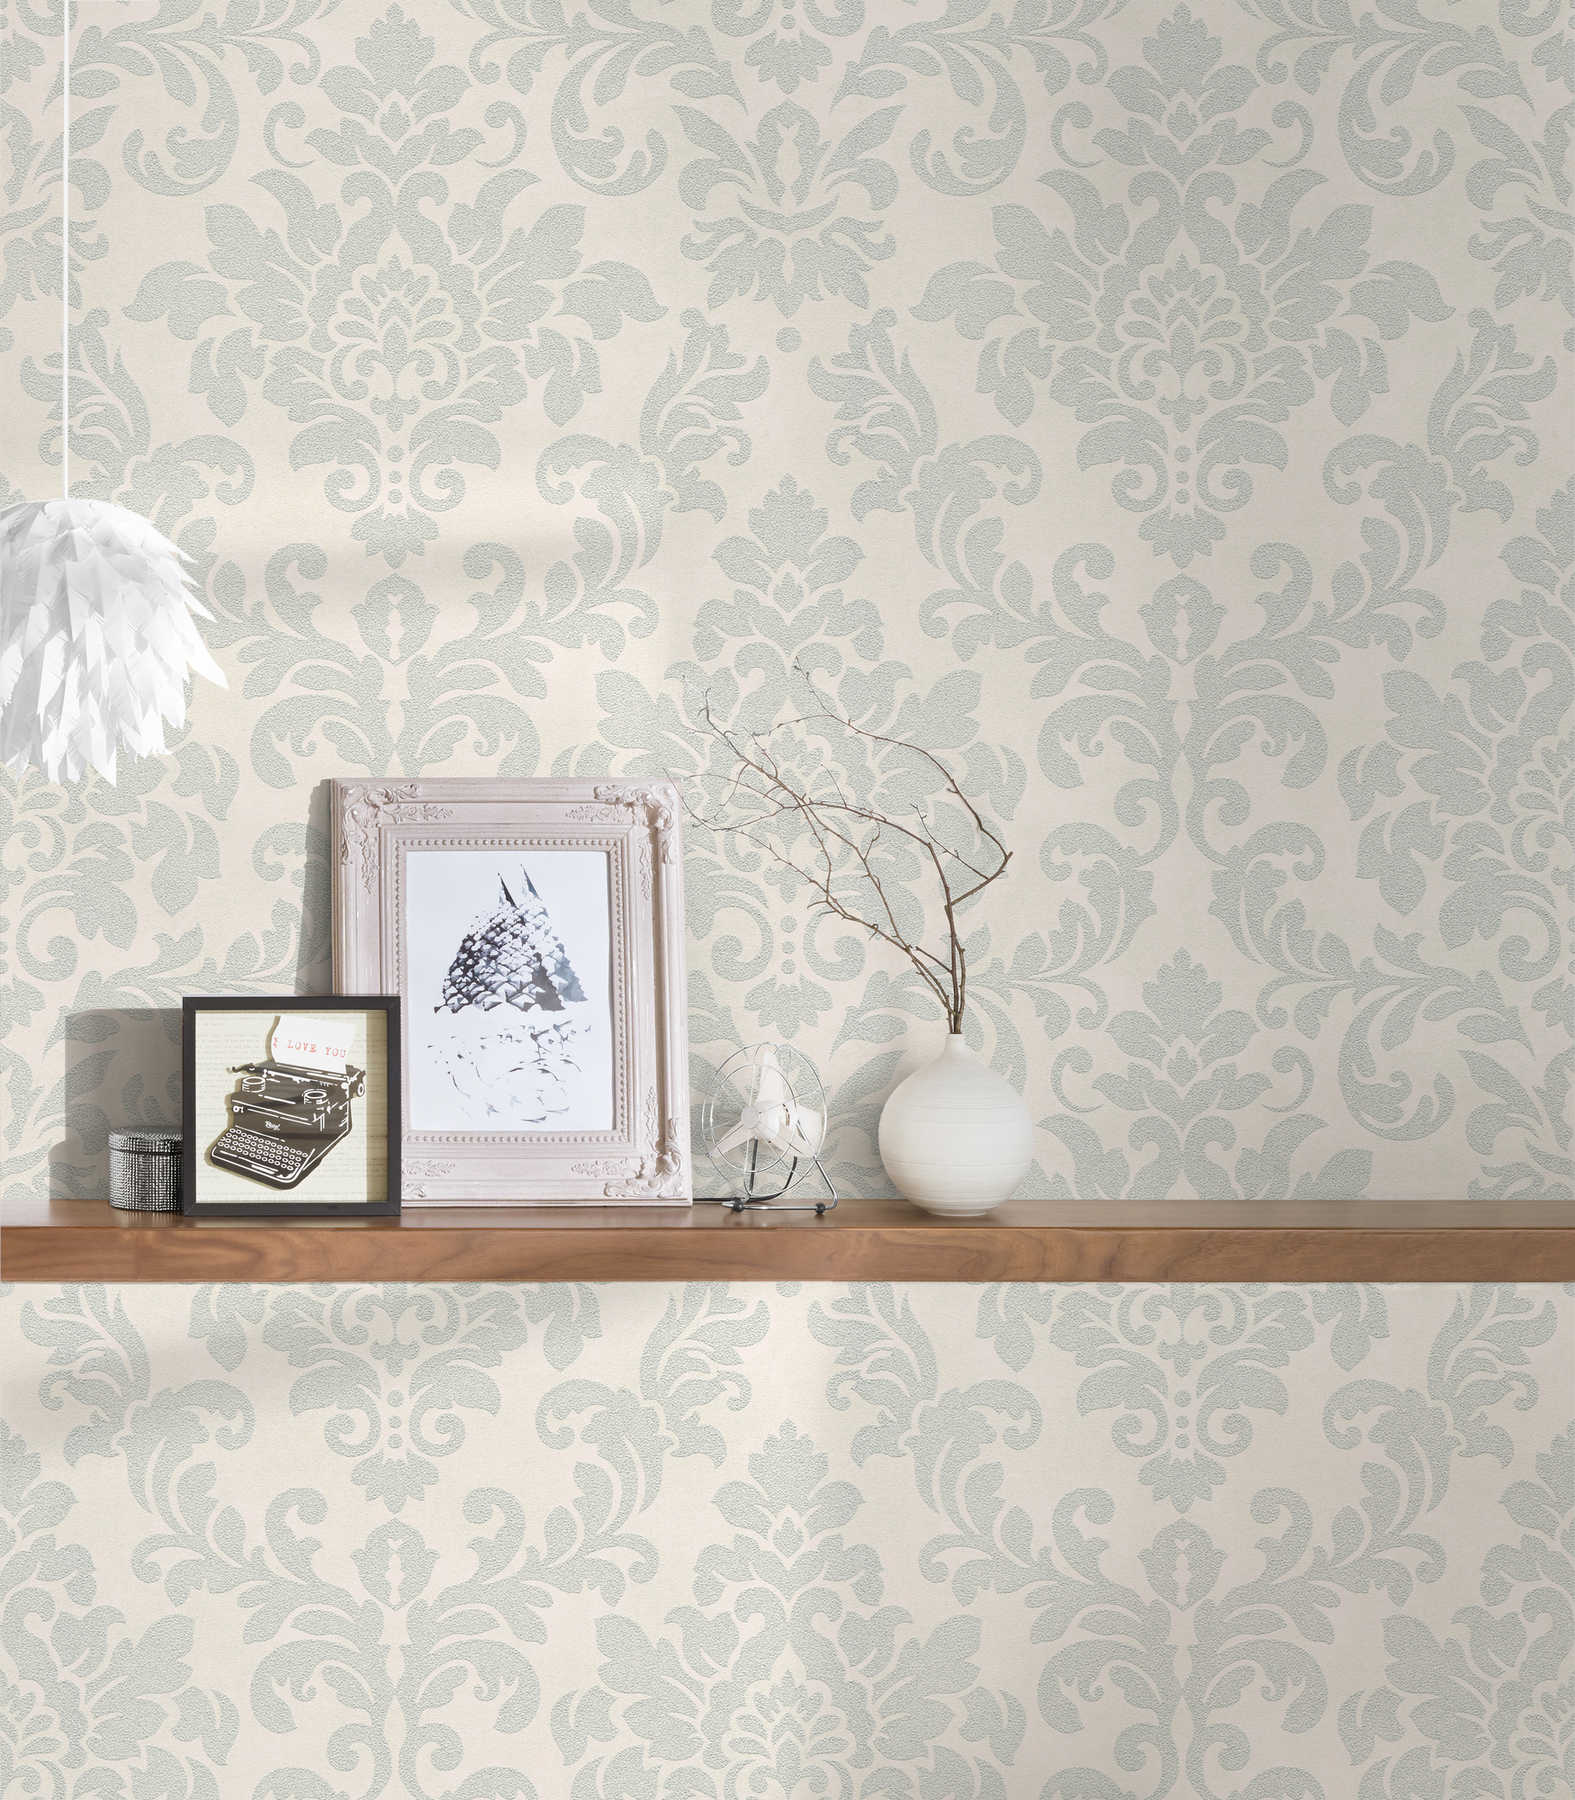             Floral ornamental wallpaper with metallic effect - grey, silver, white
        